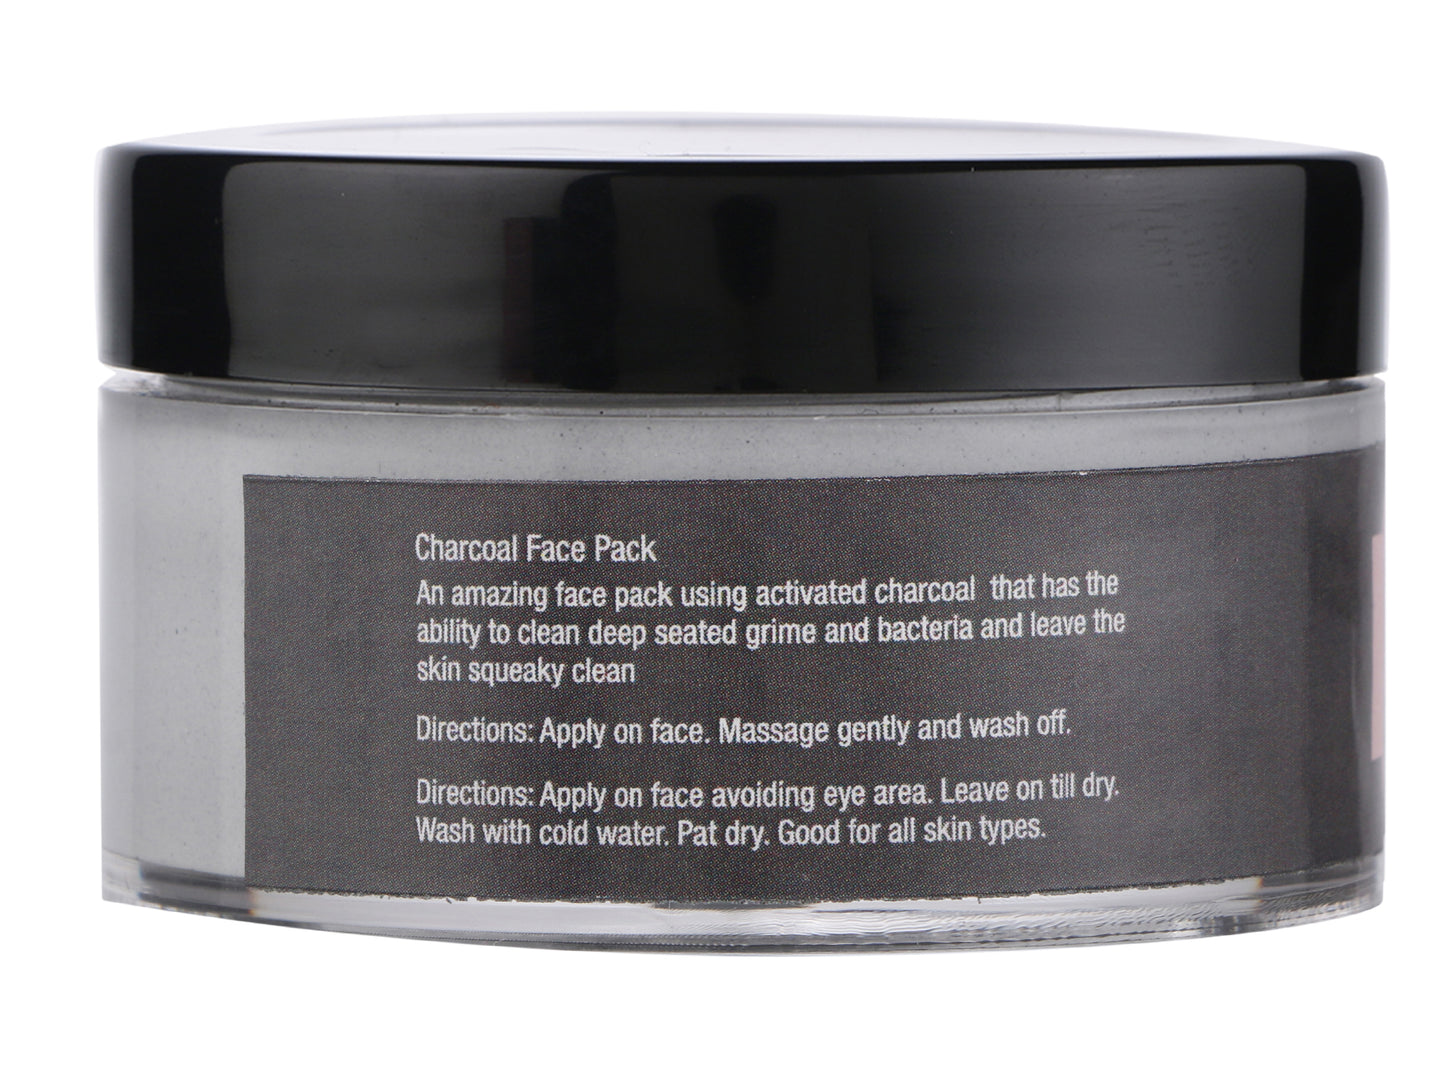 Essential Souls Charcoal Pack - 50g